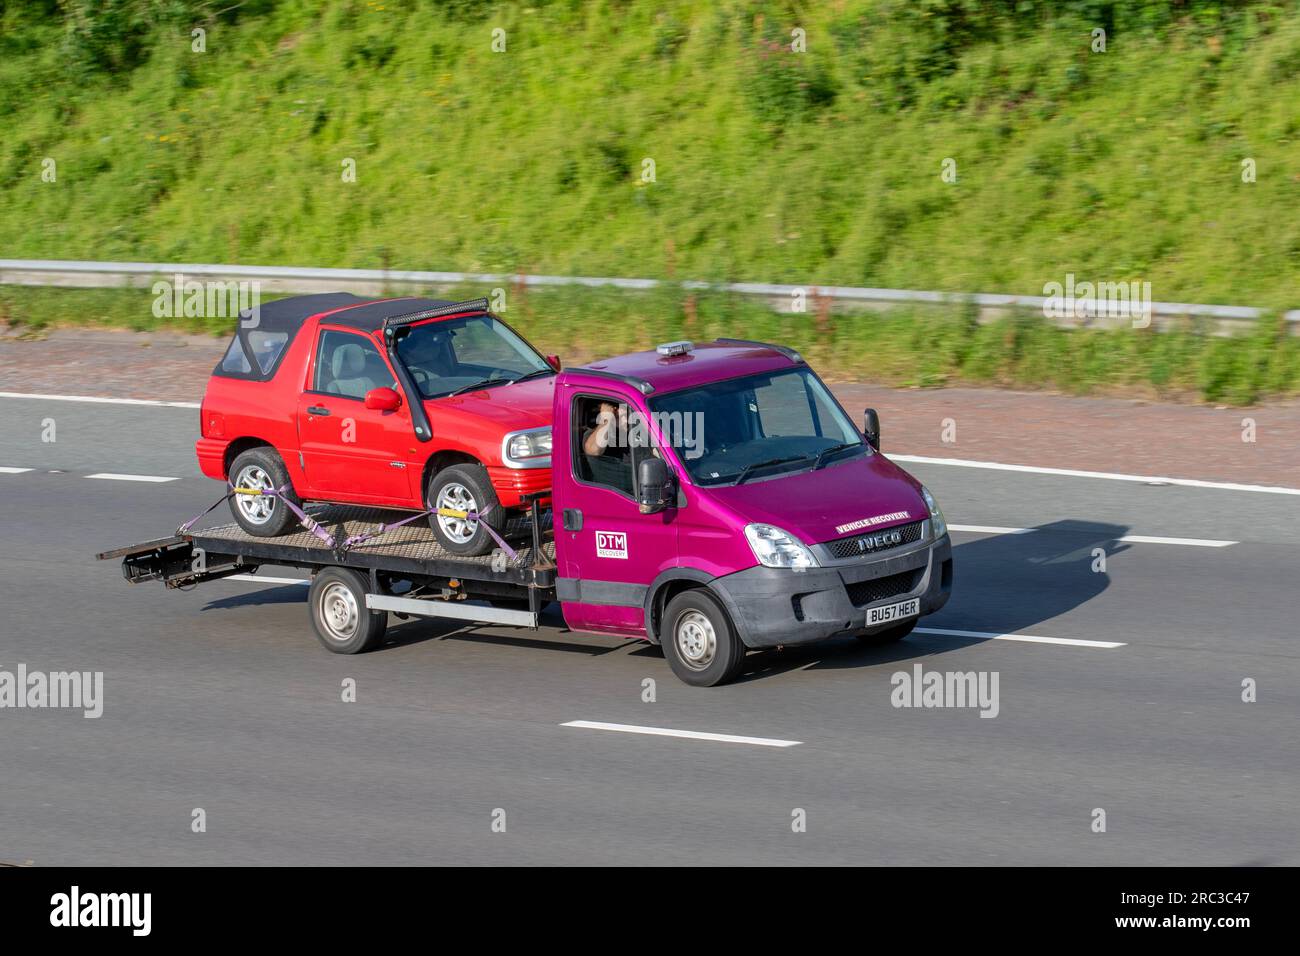 DTM Vehicle Recovery. 2010 Iveco Daily 35S11 Mwb 35S11 Hpi MWB LCV High Roof Panel Van Diesel 2287 cc, carrying 1994 90s red Mitsubishi Shogun small SUV; travelling on the M6 motorway in Greater Manchester, UK Stock Photo